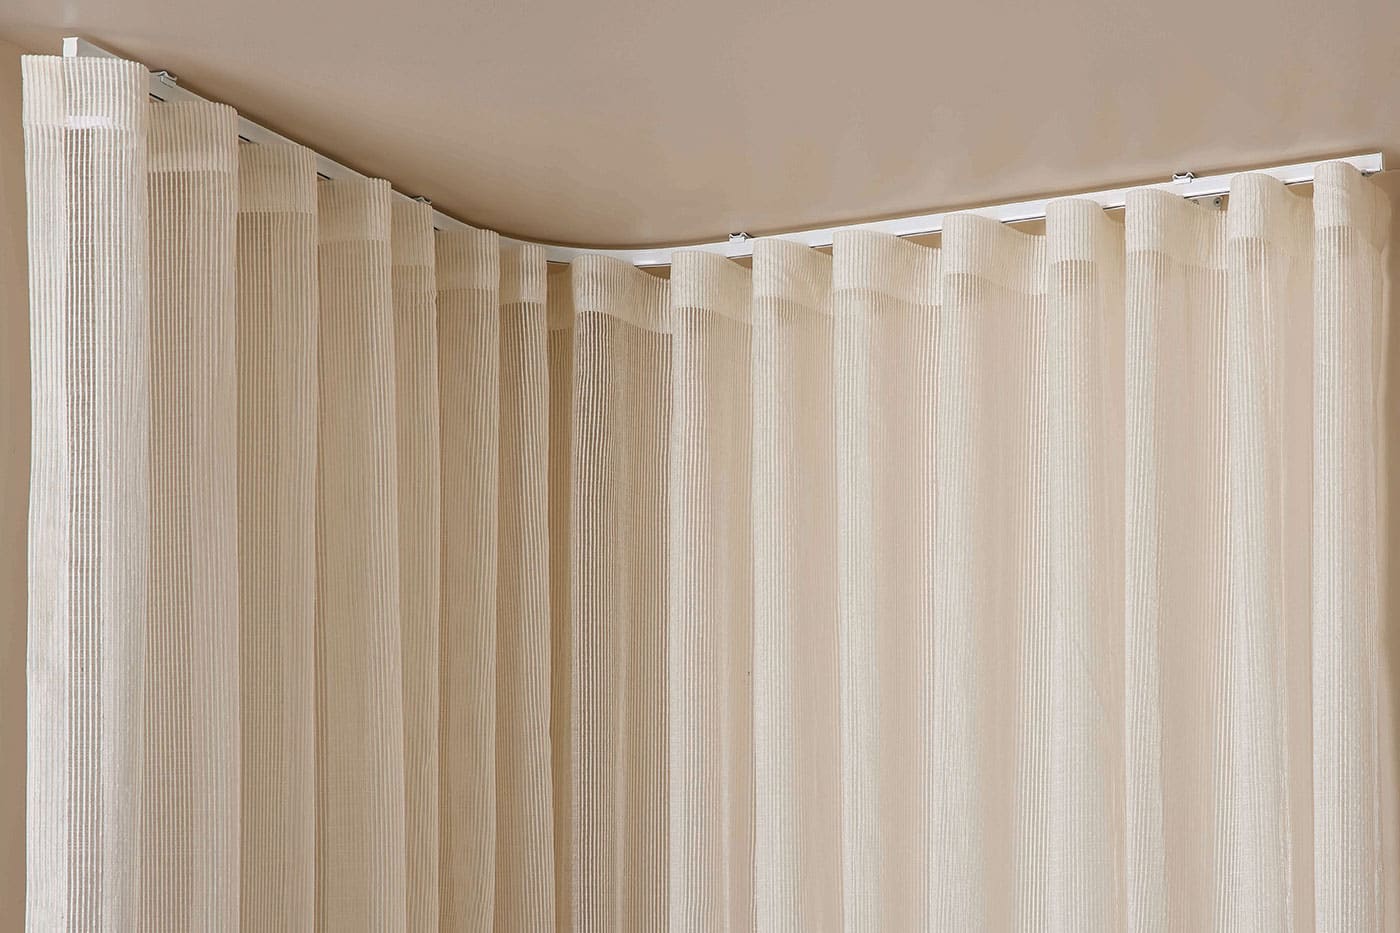 Beige colour Luxaflex curtains for ultimate privacy and natural light flow control. Available in various fabric designs, systems, and opacity. Available in Complete Blinds Sydney showroom.